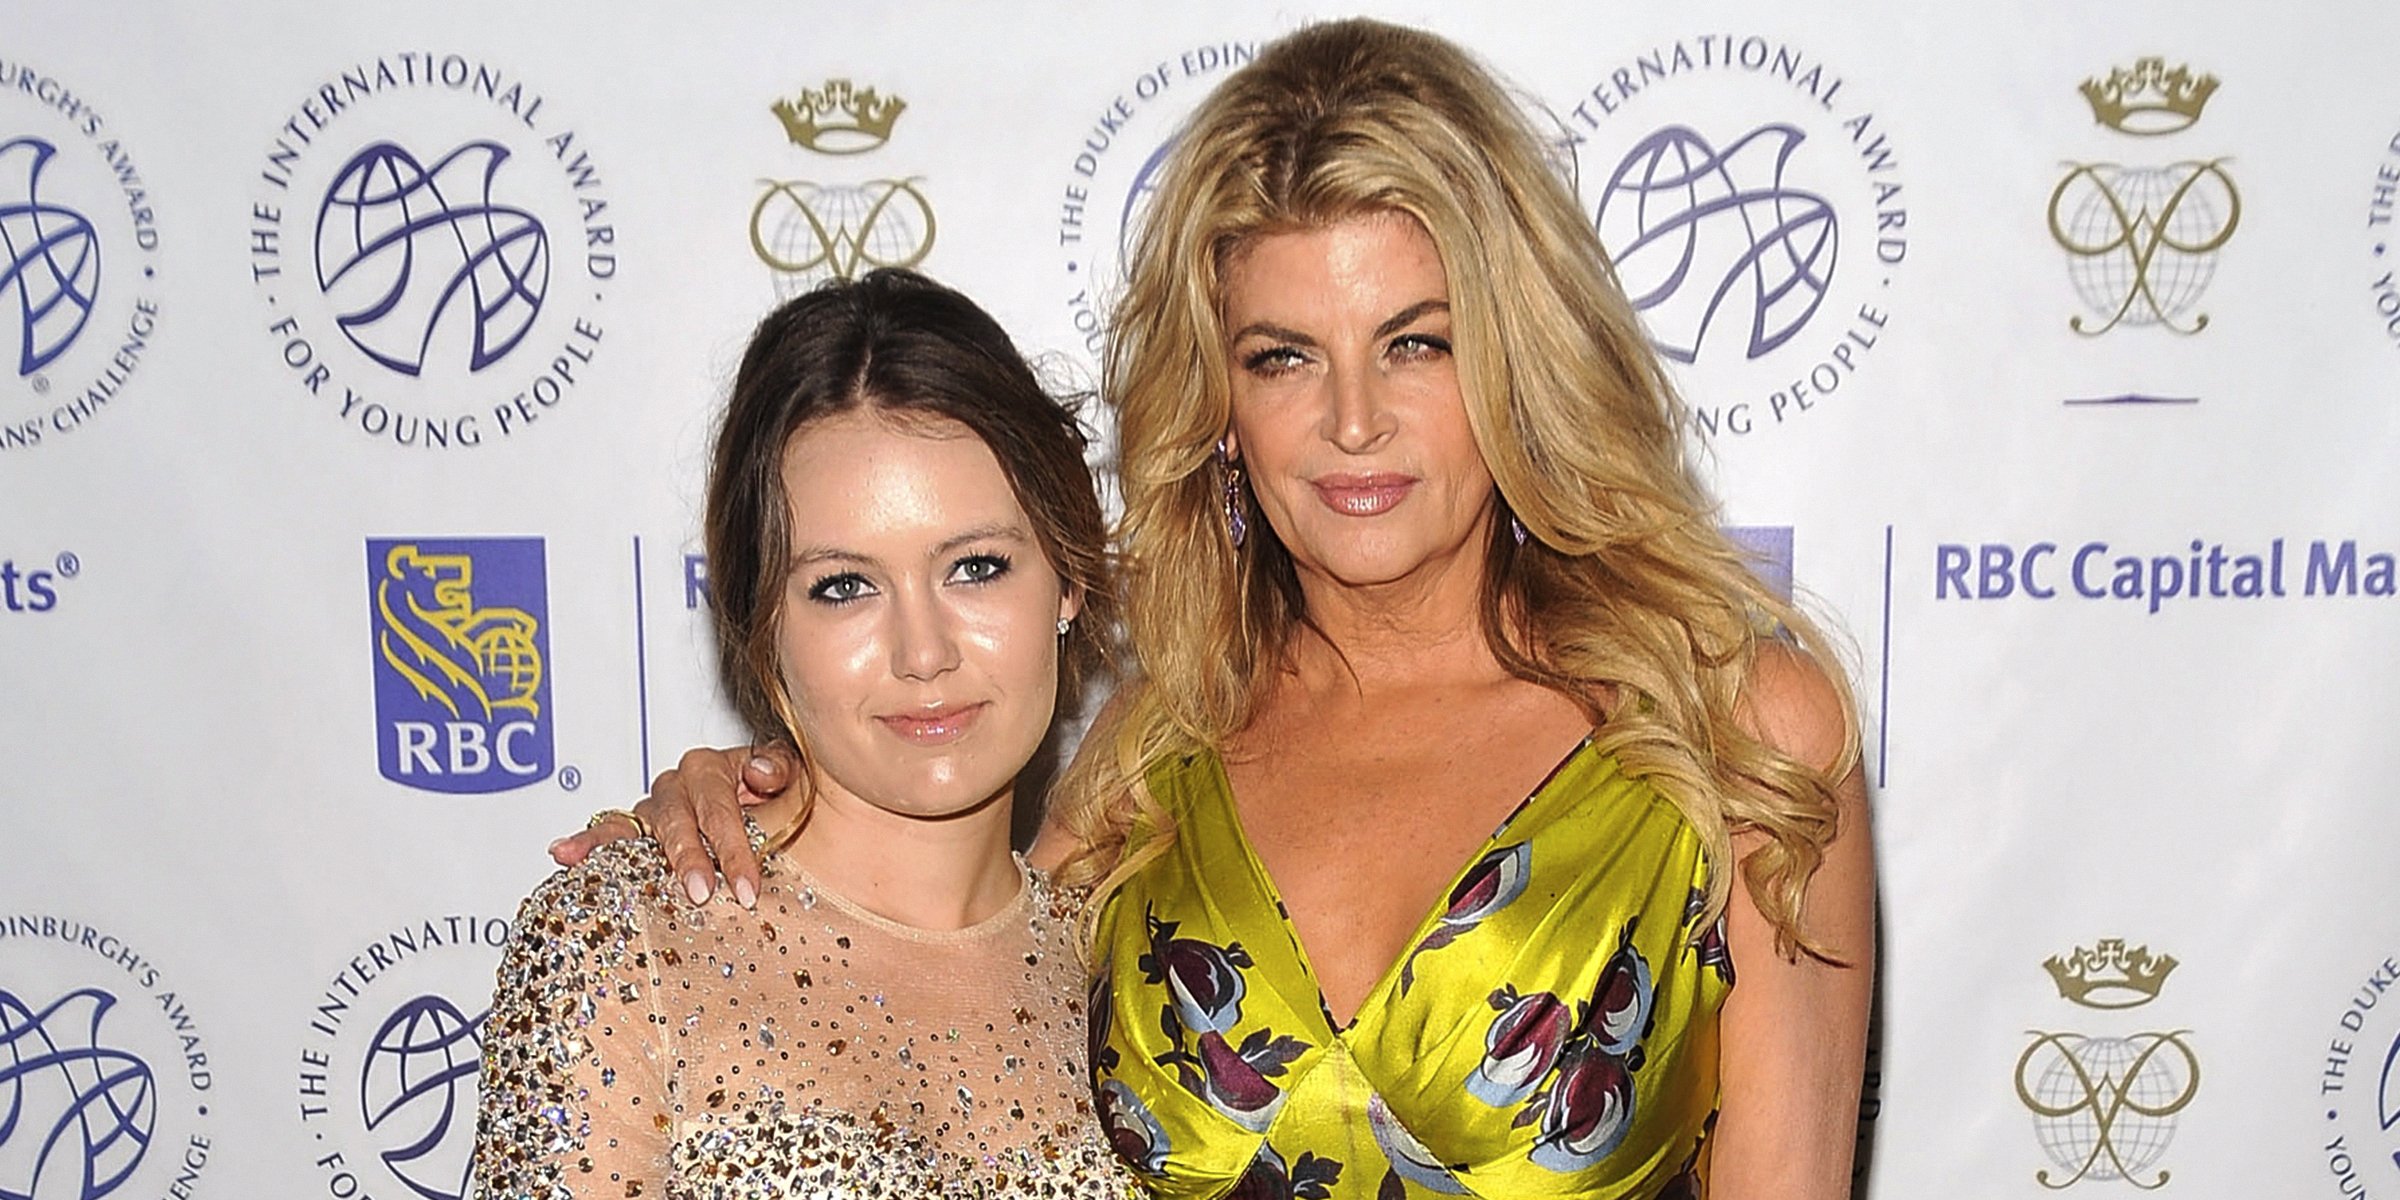 Lillie Price Stevenson and Kirstie Alley. | Source: Getty Images